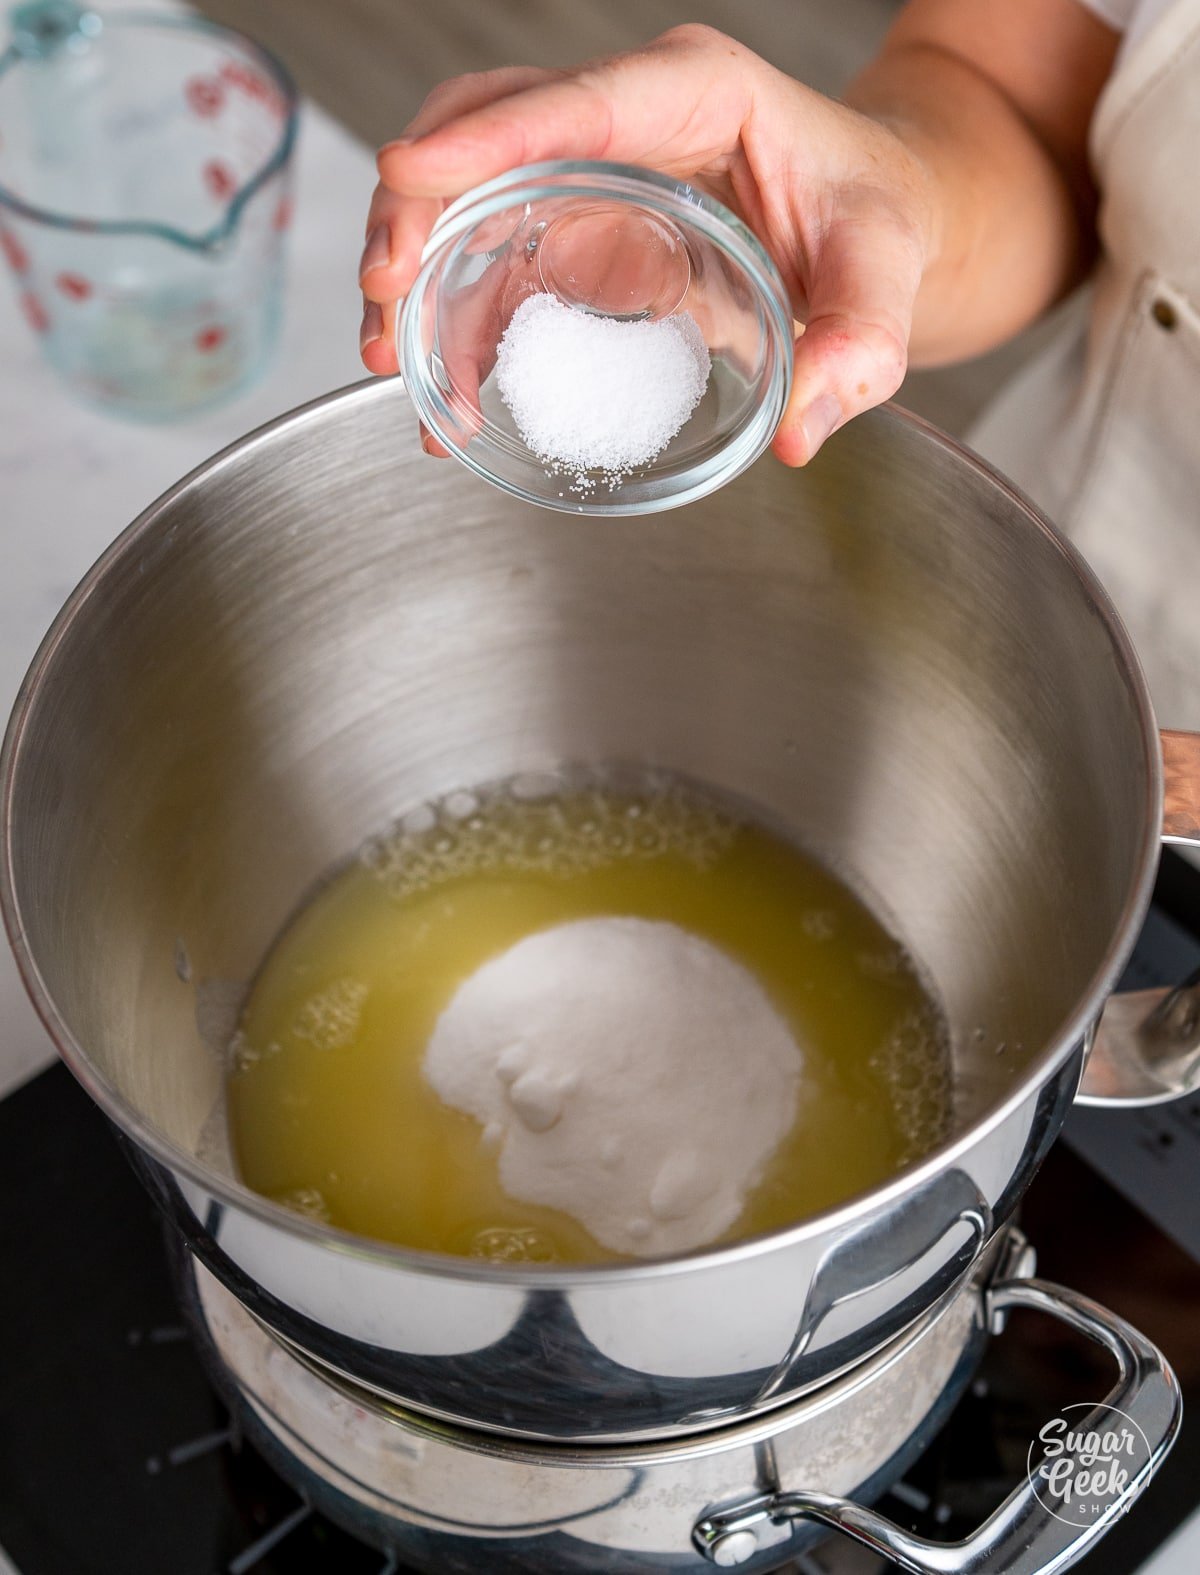 hand adding salt to stand mixer bowl with egg whites and sugar.